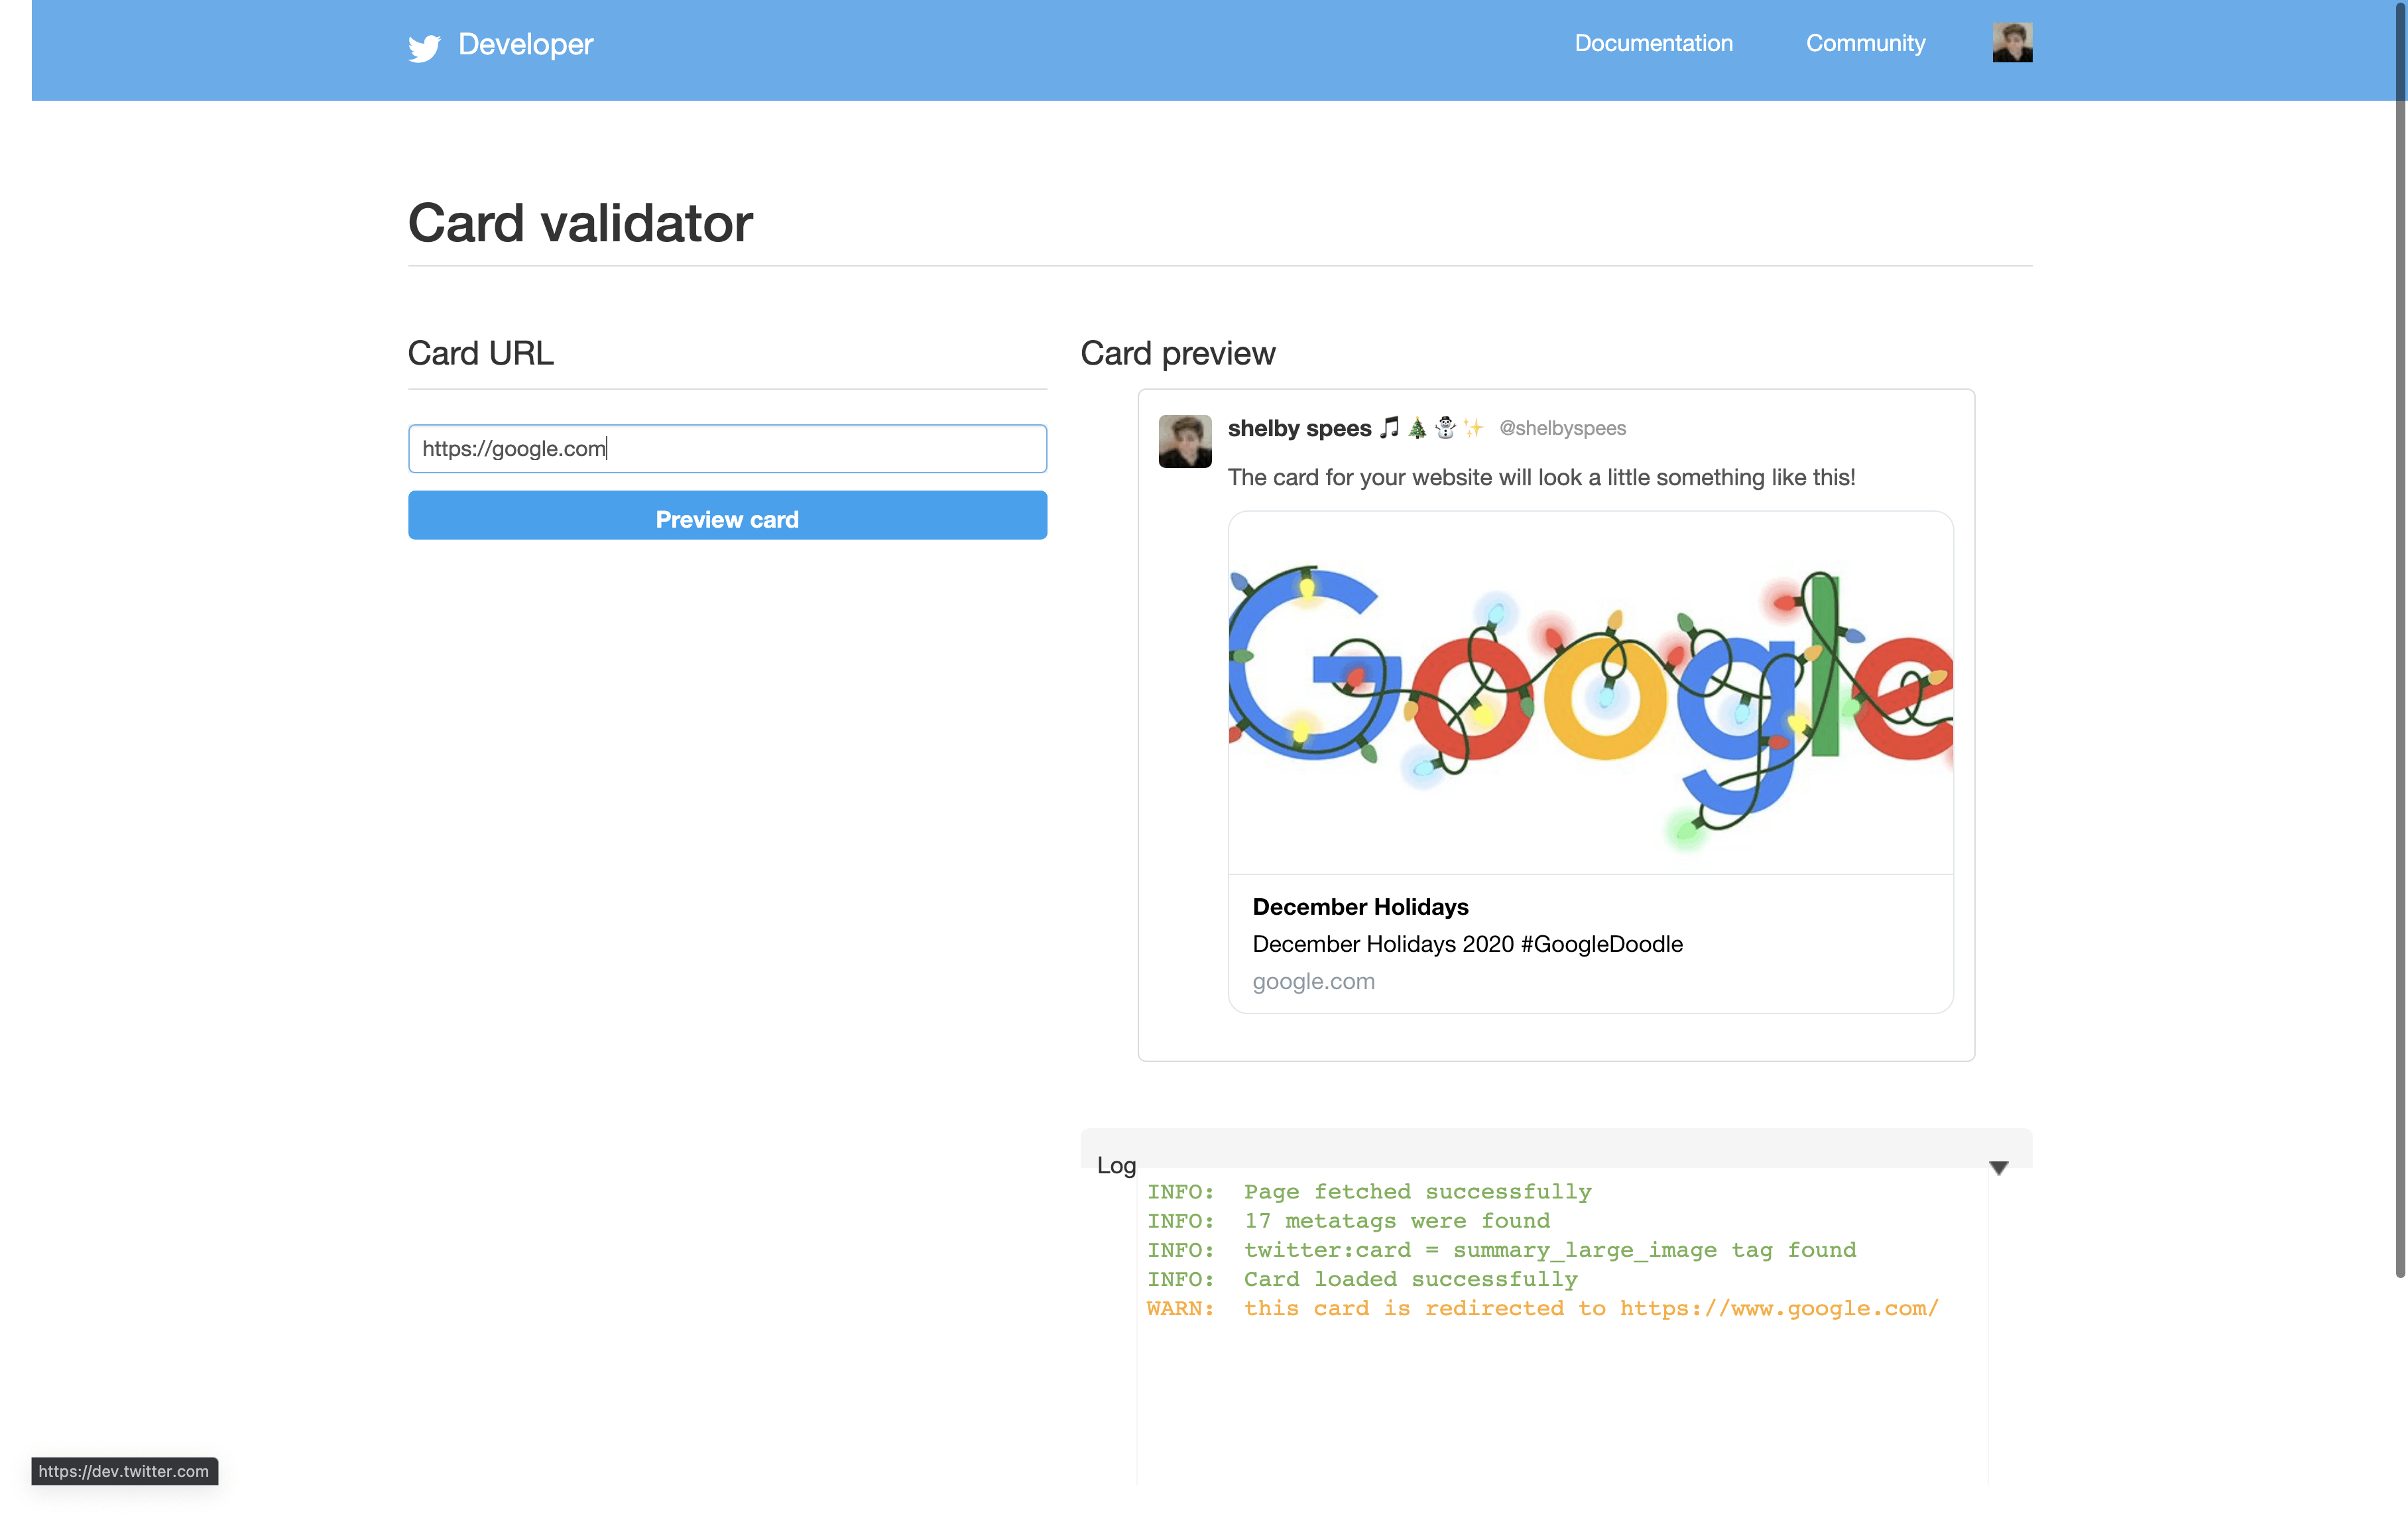 Twitter card validator preview for Google.com, showing the link unfurl with the Google logo decorated for the holidays